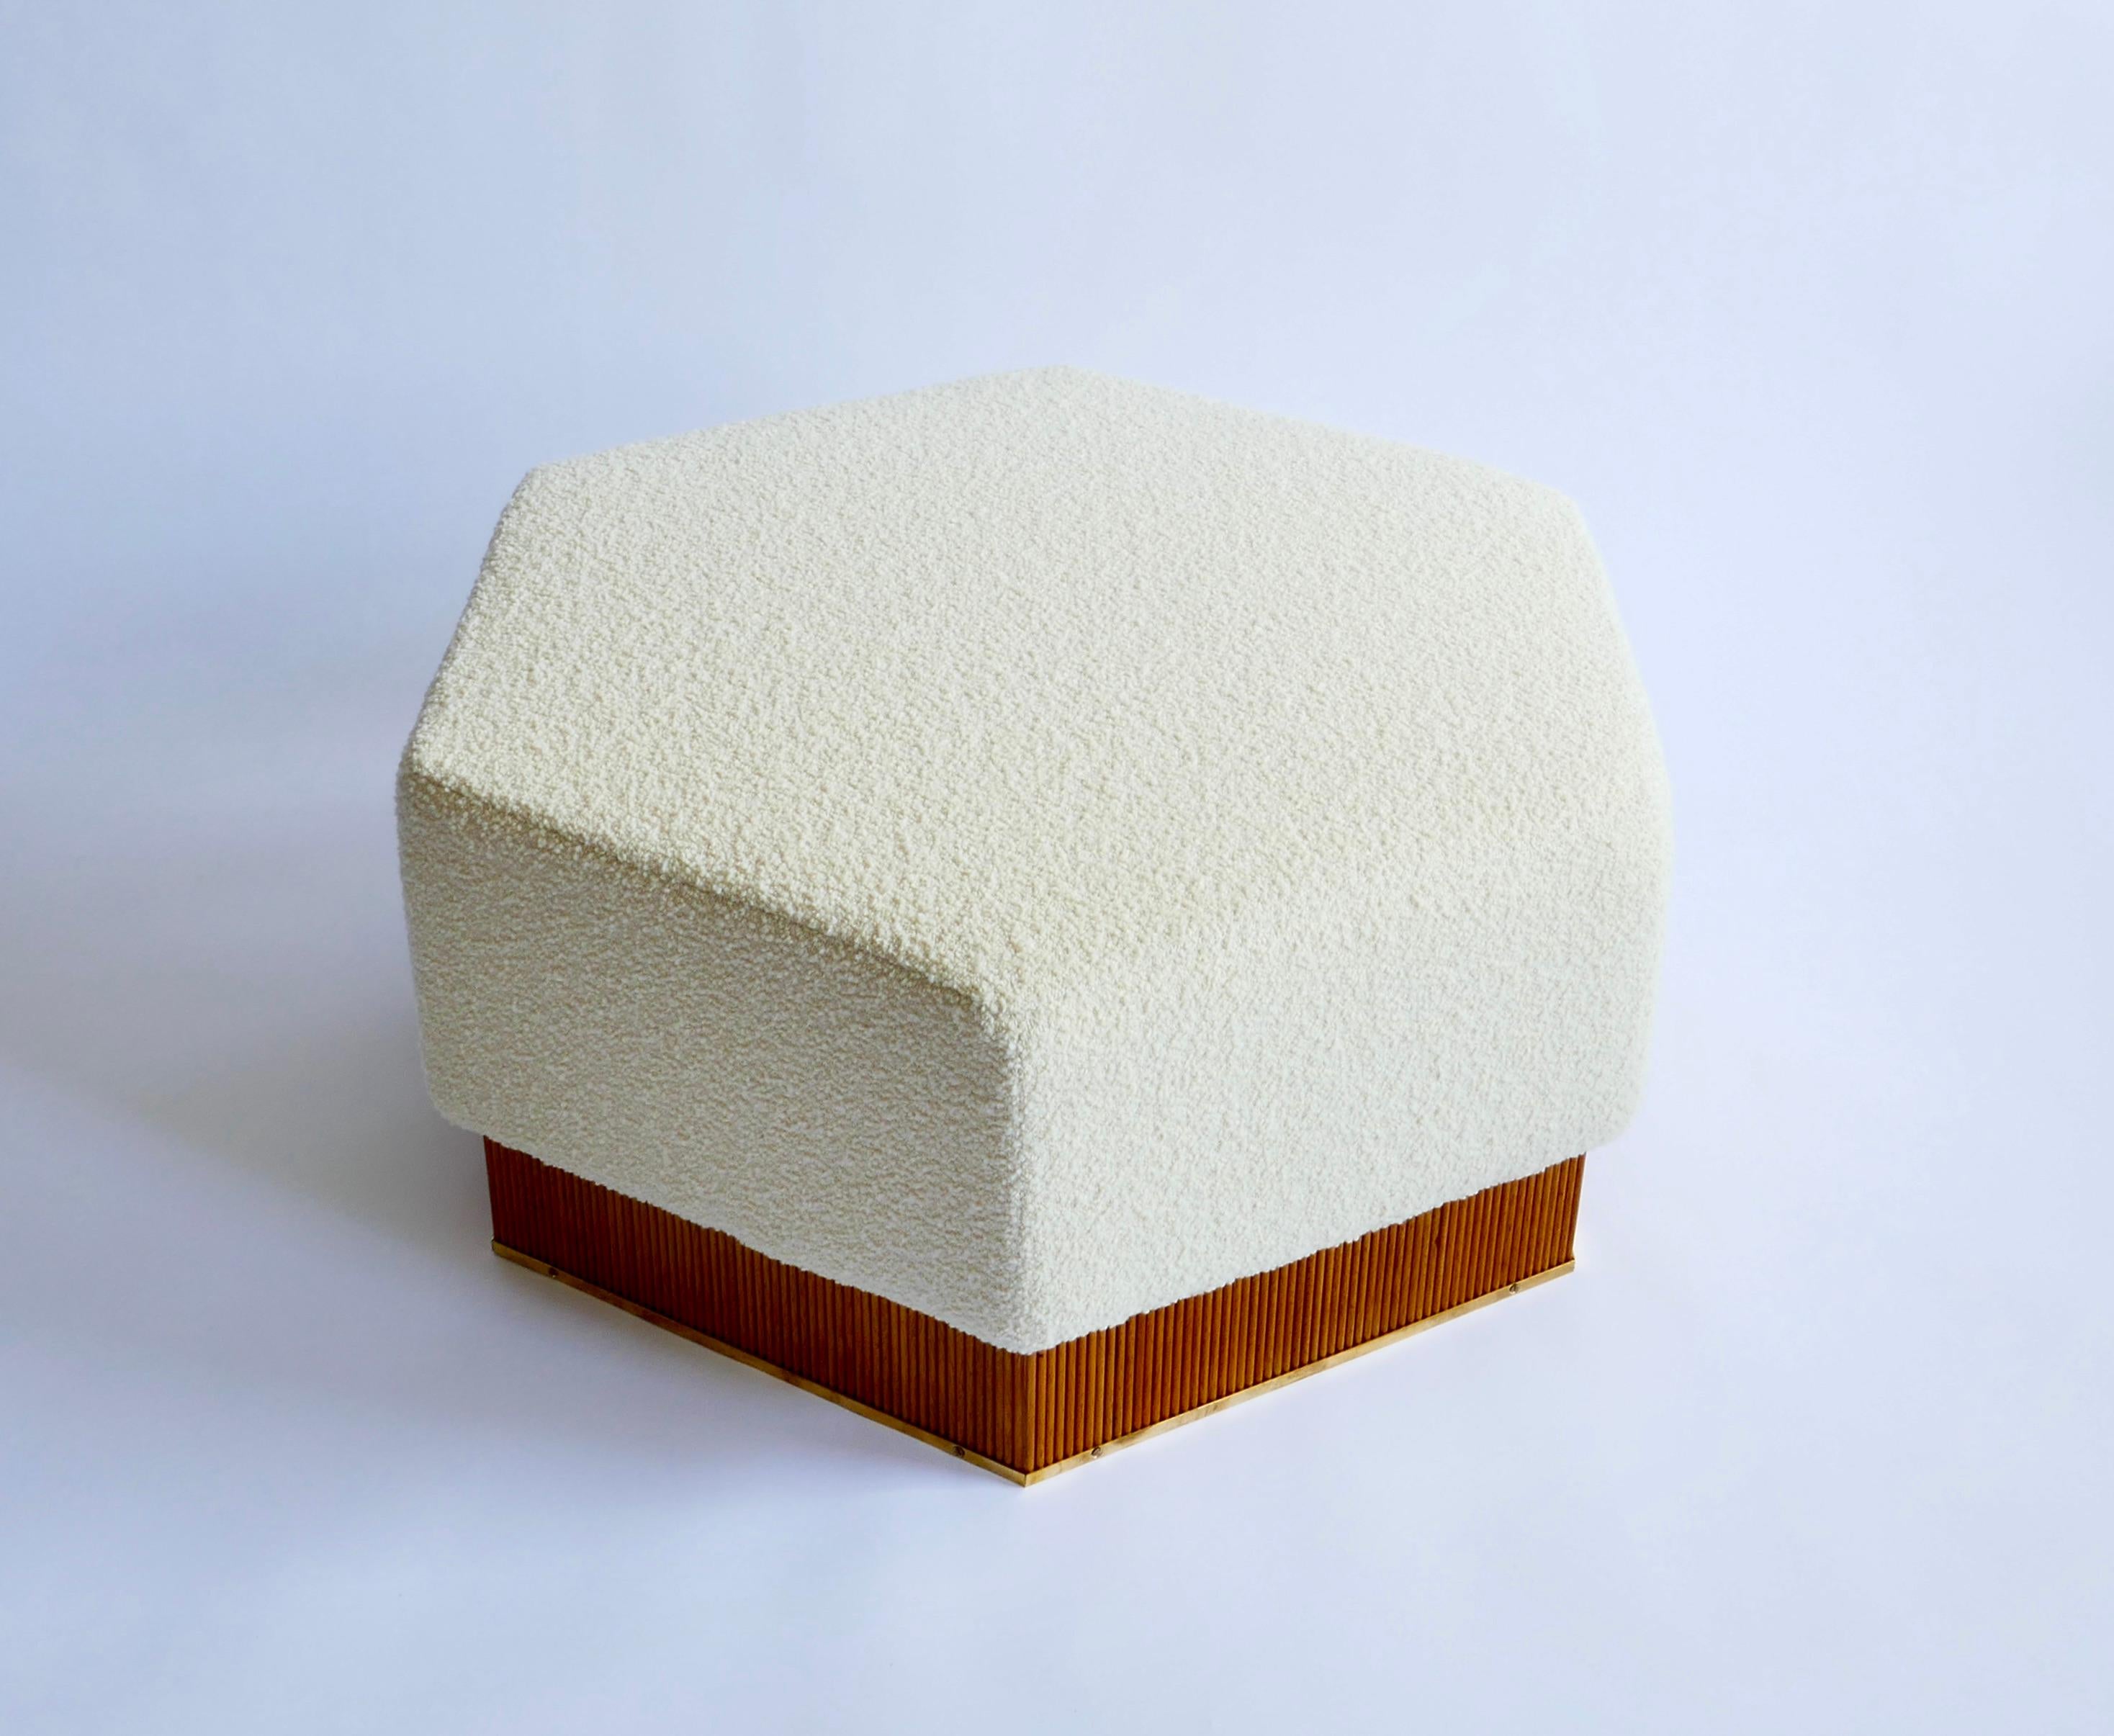 A hexagonal pouf with white boucle seat and a wood base.
Great occasional seating but solid to use as a low table as well.
A contemporary item, highly decorative and versatile
Italy.